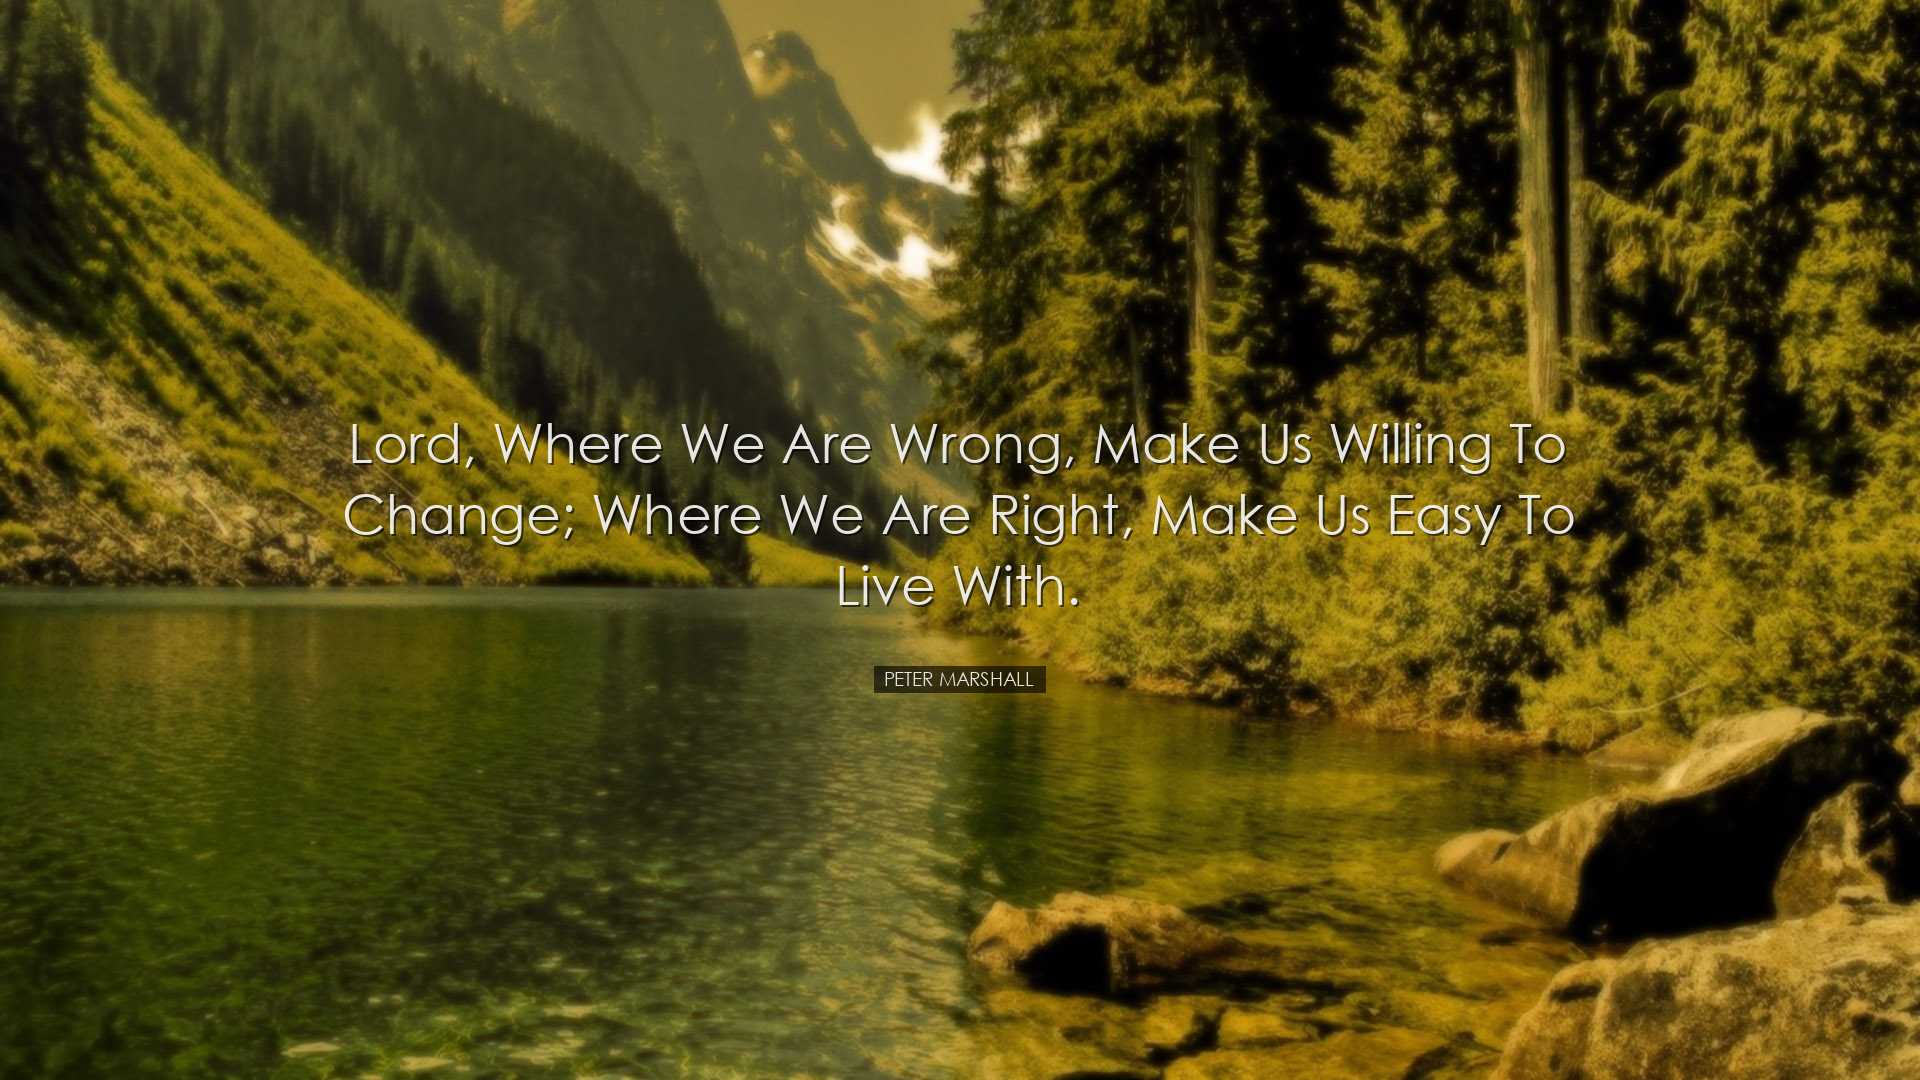 Lord, where we are wrong, make us willing to change; where we are